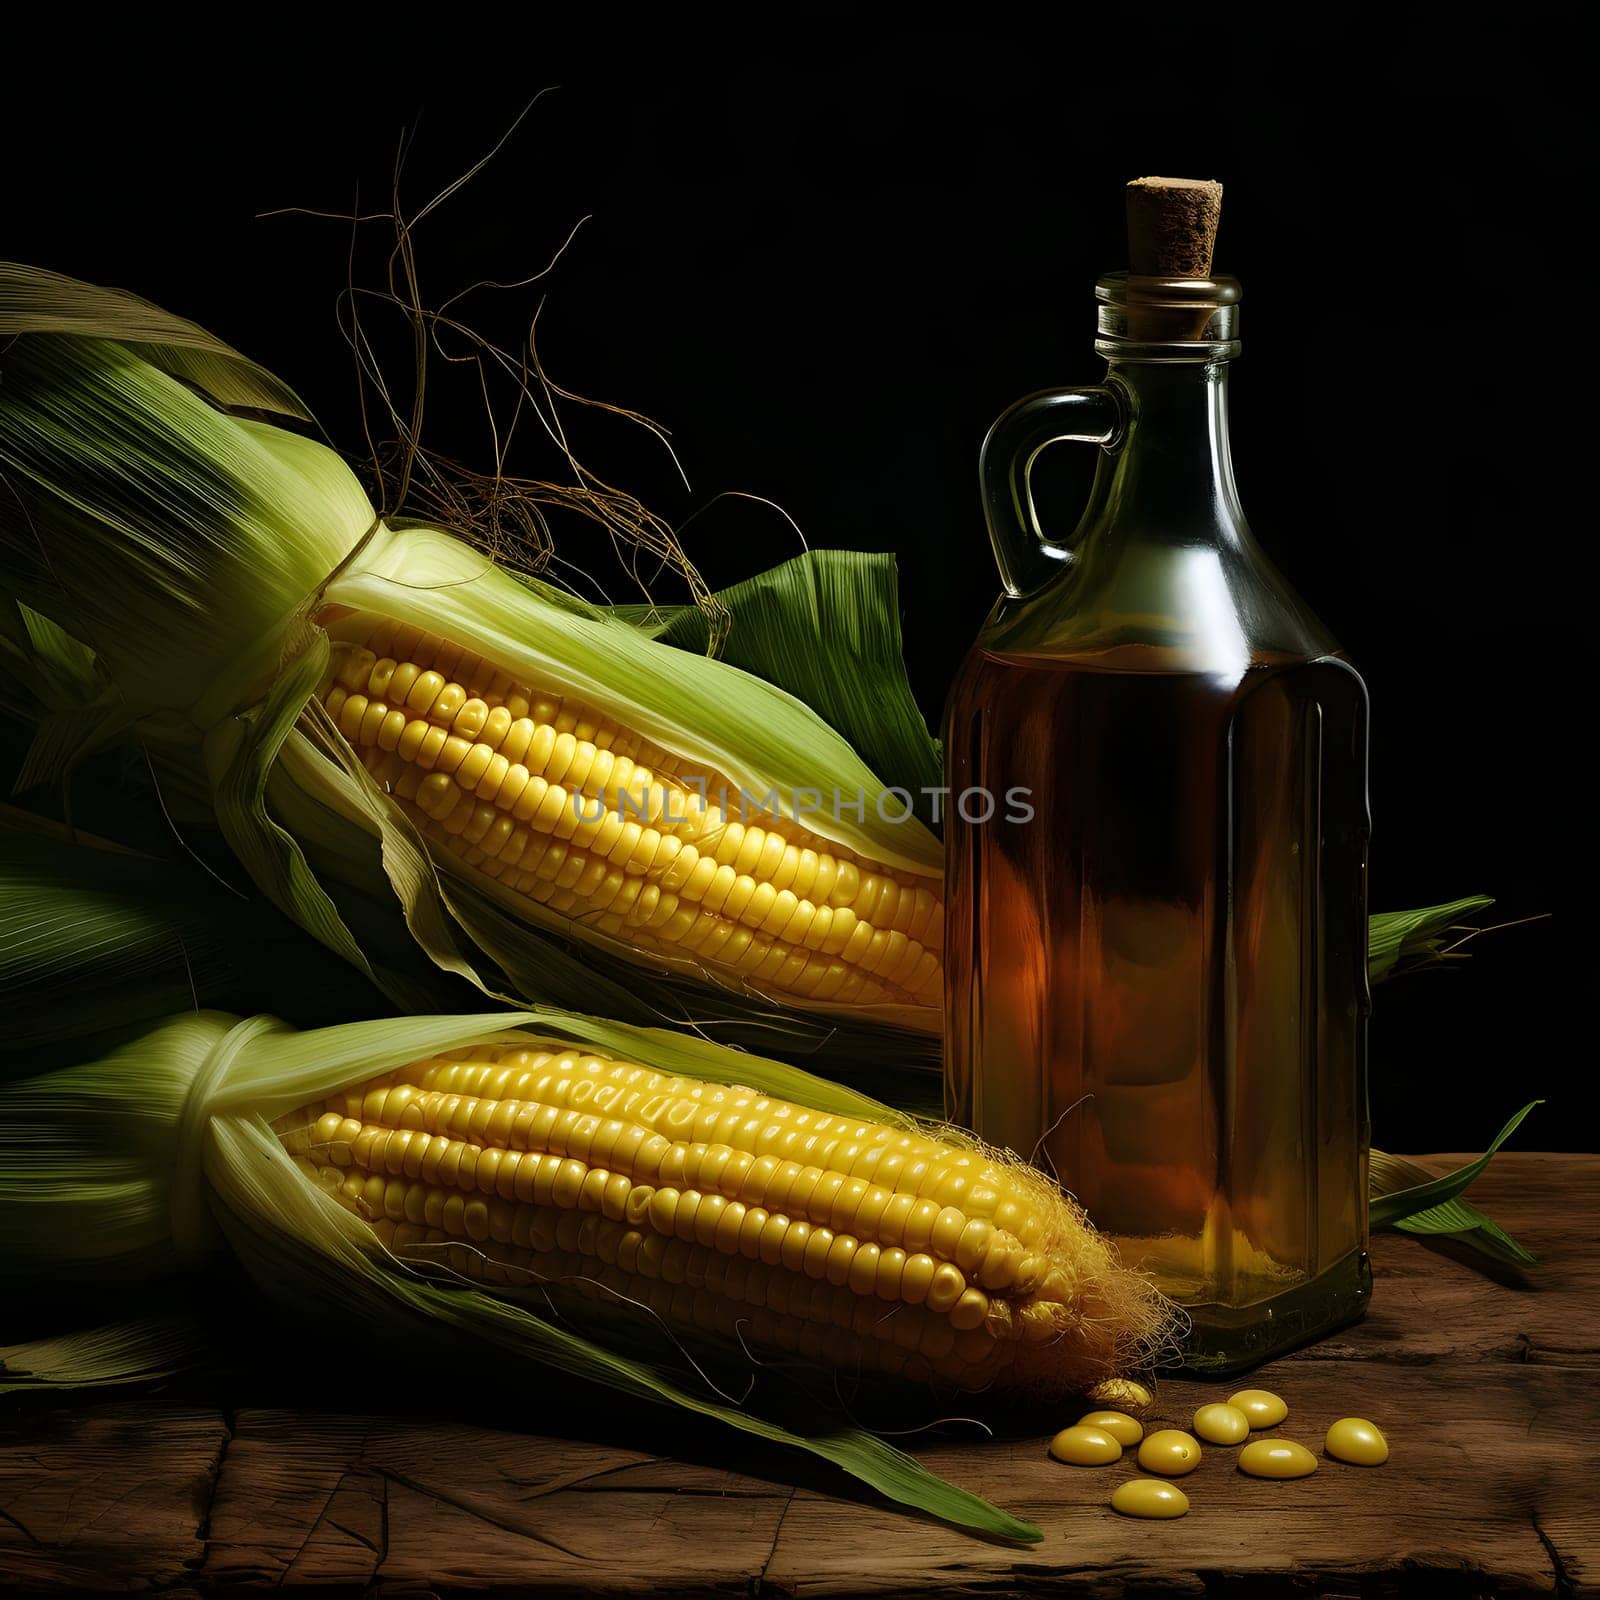 Two yellow corn cobs and a bottle with cork on a wooden table top, dark background. Corn as a dish of thanksgiving for the harvest. by ThemesS